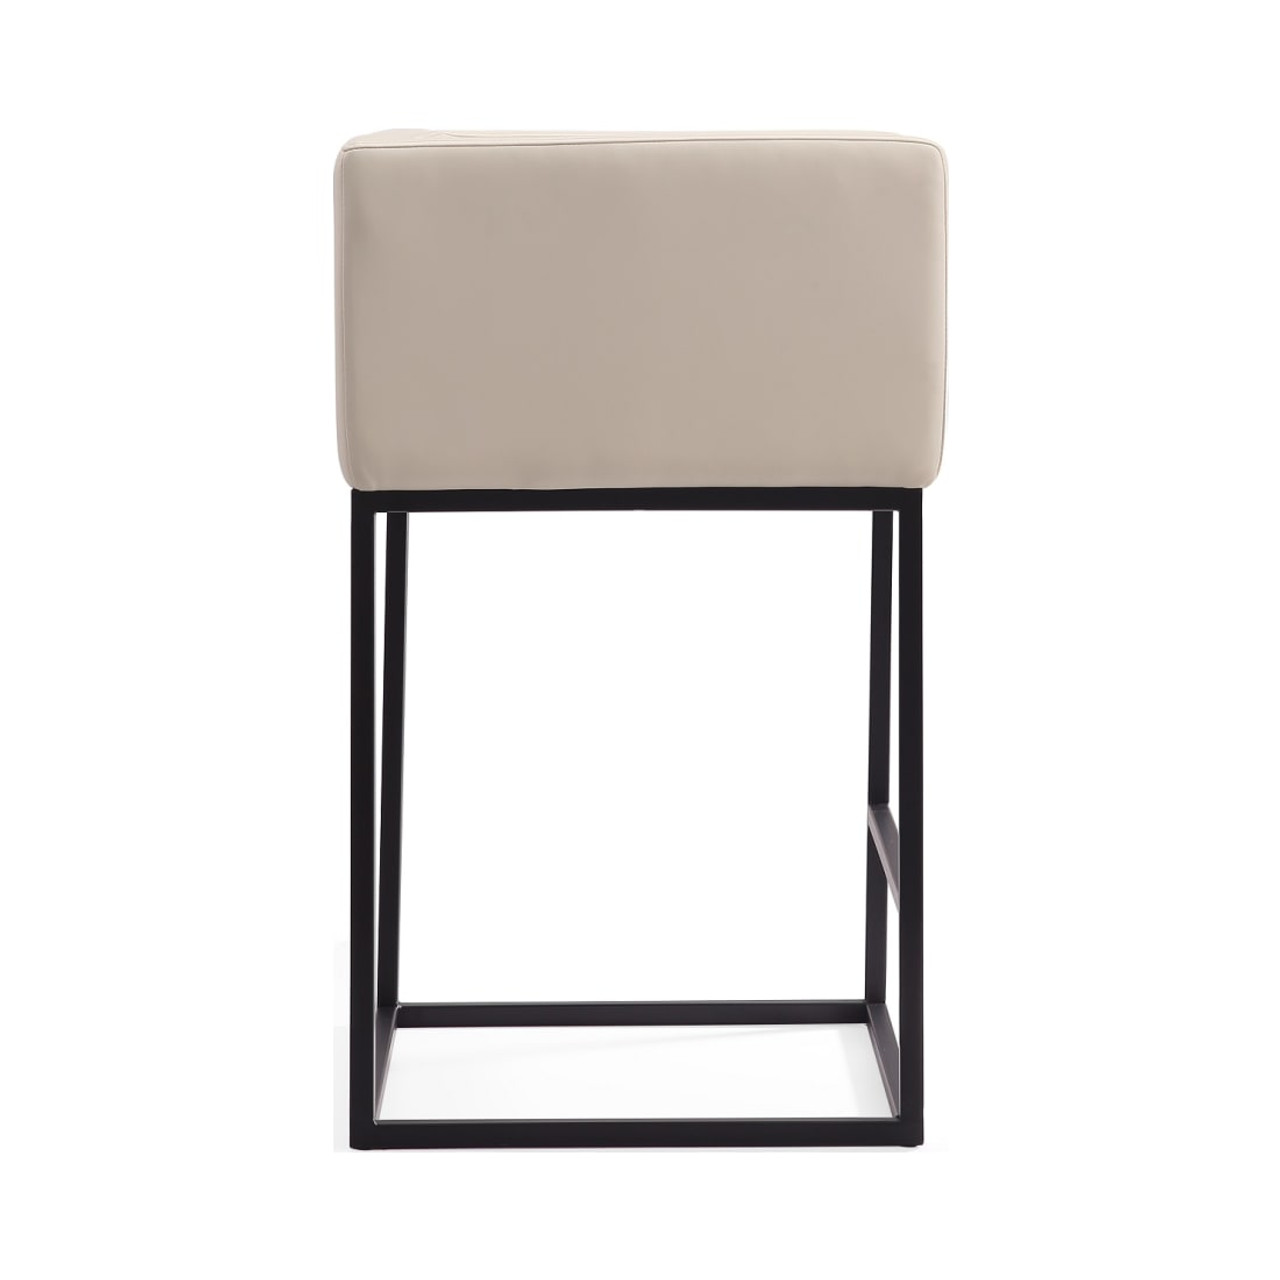 Embassy Counter Stool in Cream and Black